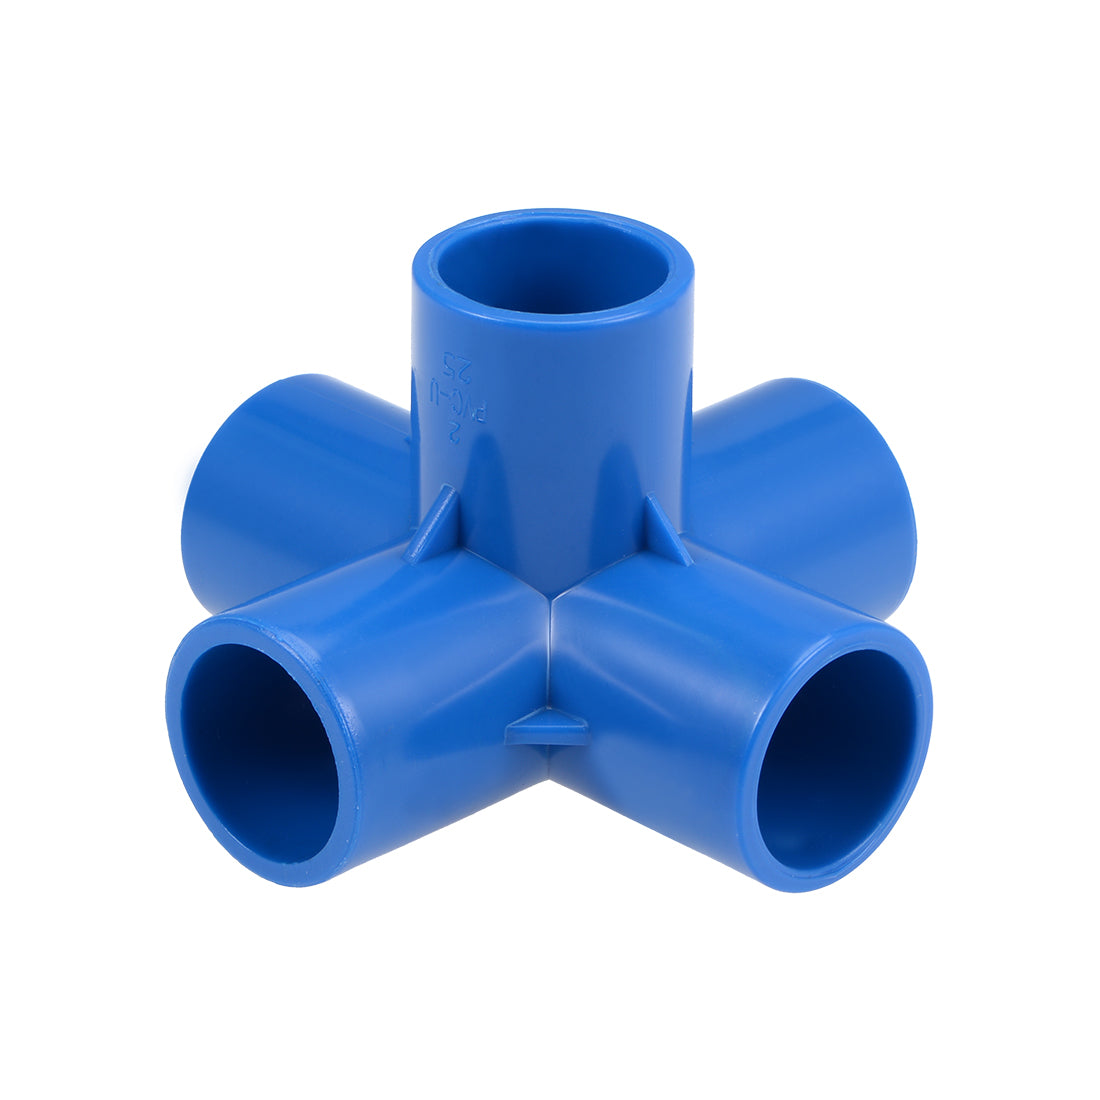 uxcell Uxcell 5 Way 25mm Tee Metric PVC Fitting Elbow - PVC Furniture C Elbow Fittings Blue 10Pcs